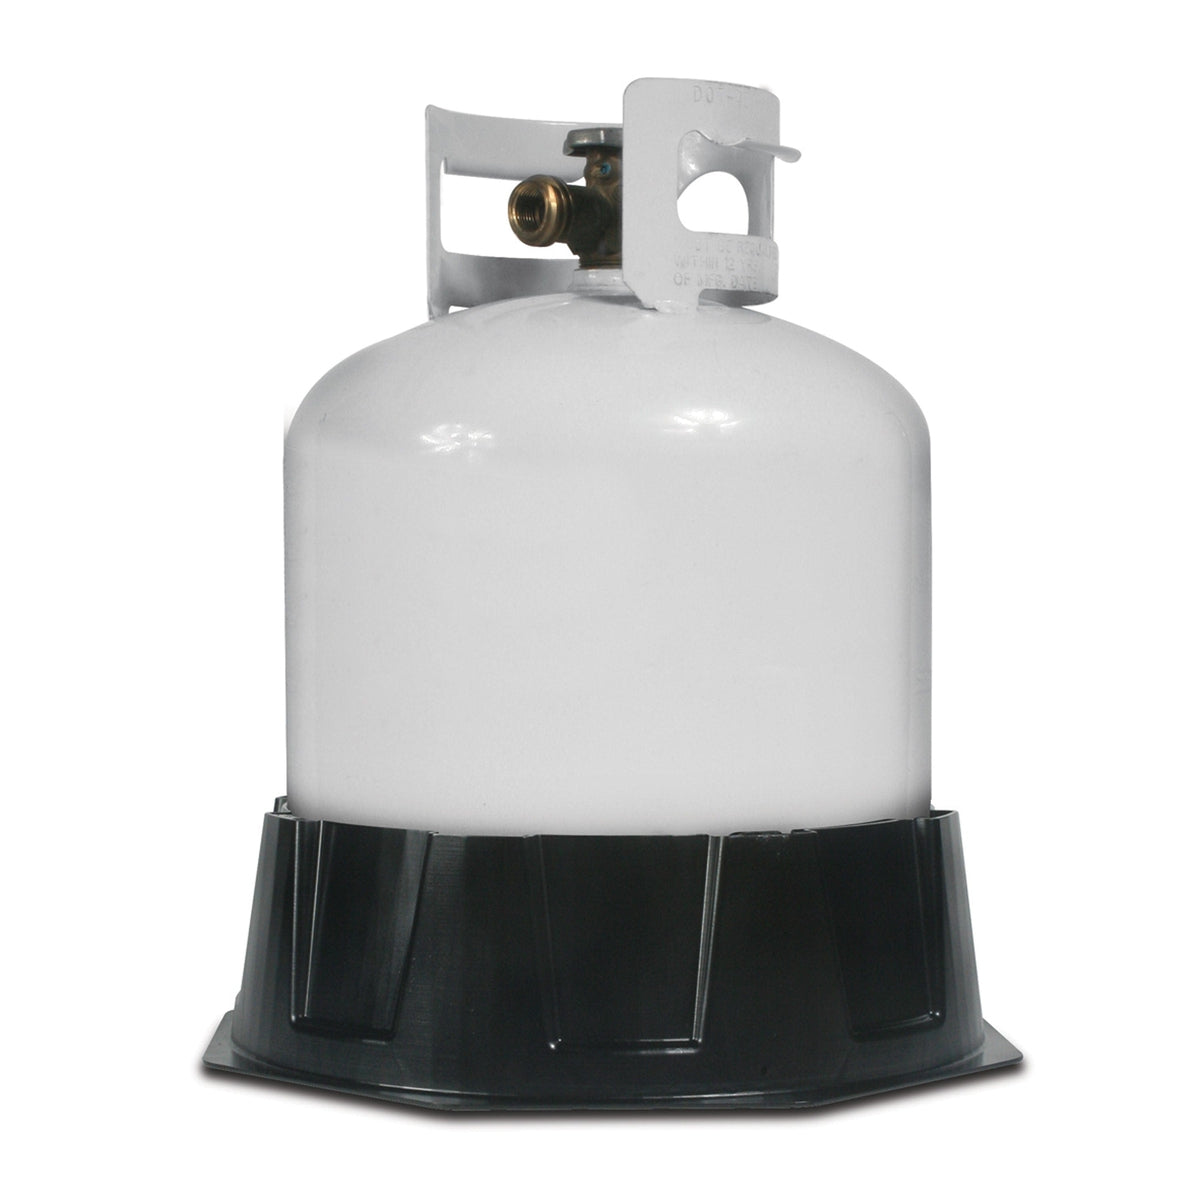 Camco Qualifies for Free Shipping Camco Cylinder Stabilizing Base for 20 and 30 lb Propane Tank #57236